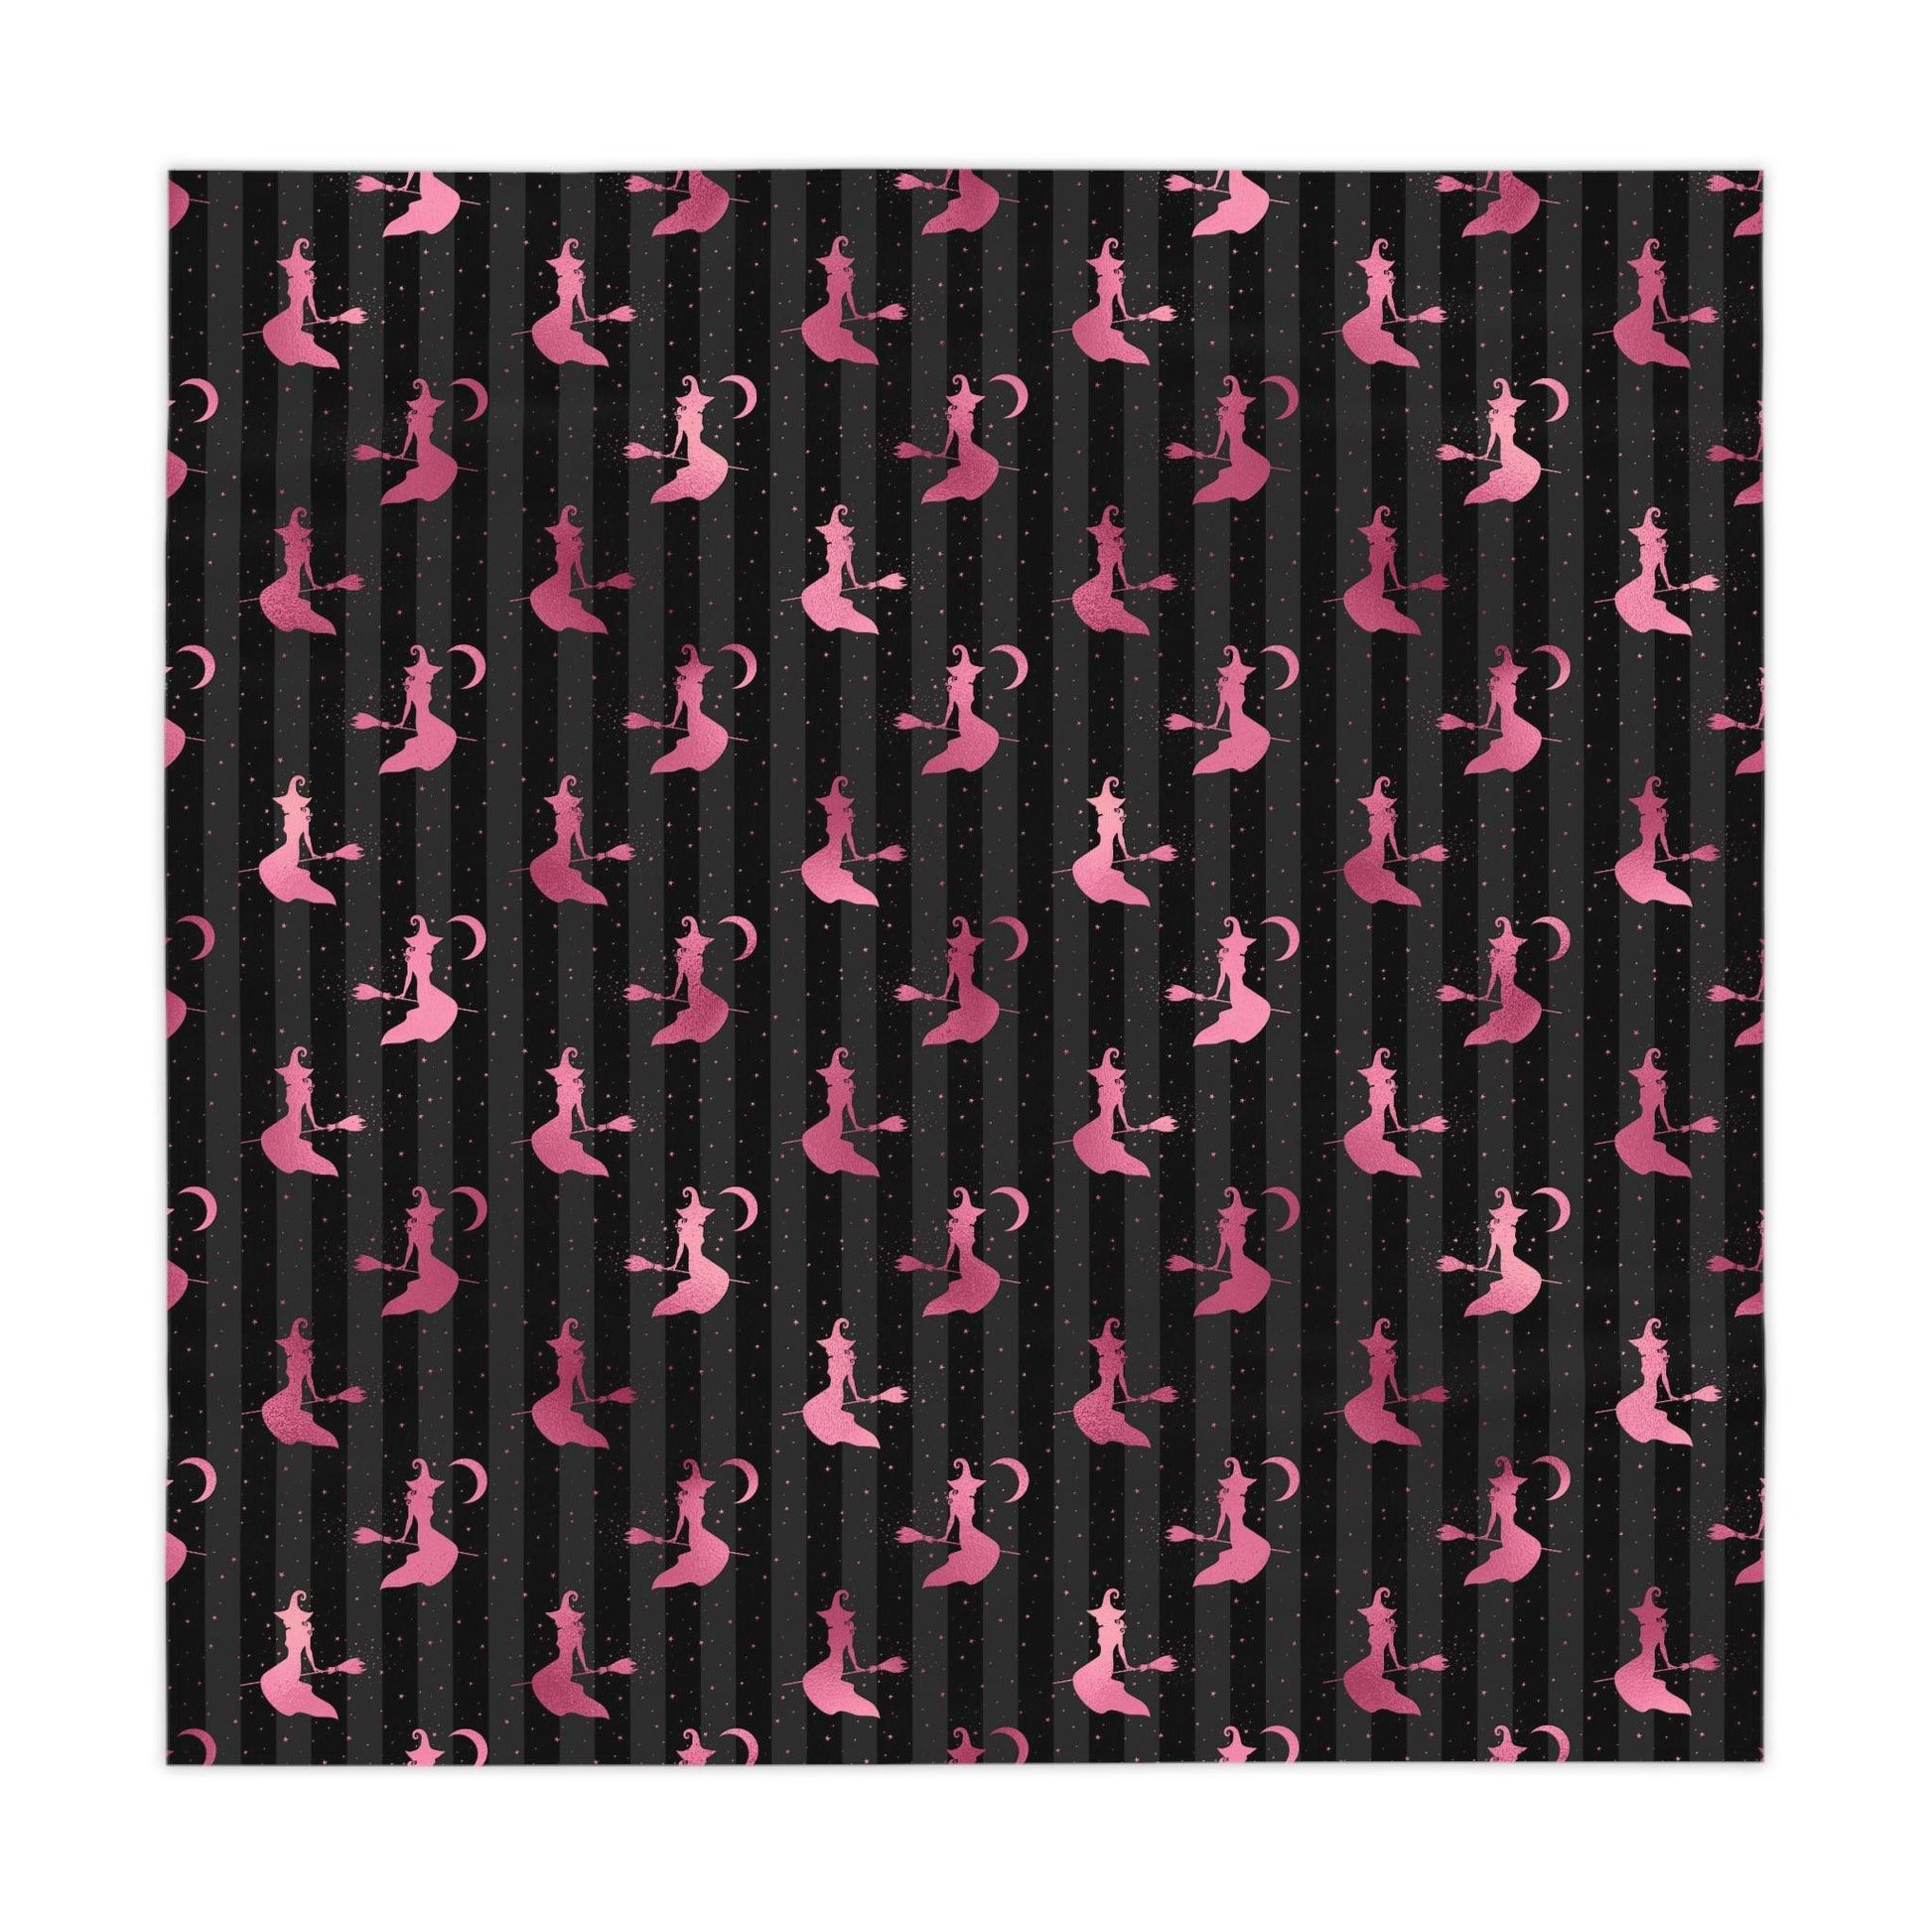 Flying Witch Silhouette Glam Goth Halloween Pink and Black Tablecloth | lovevisionkarma.com